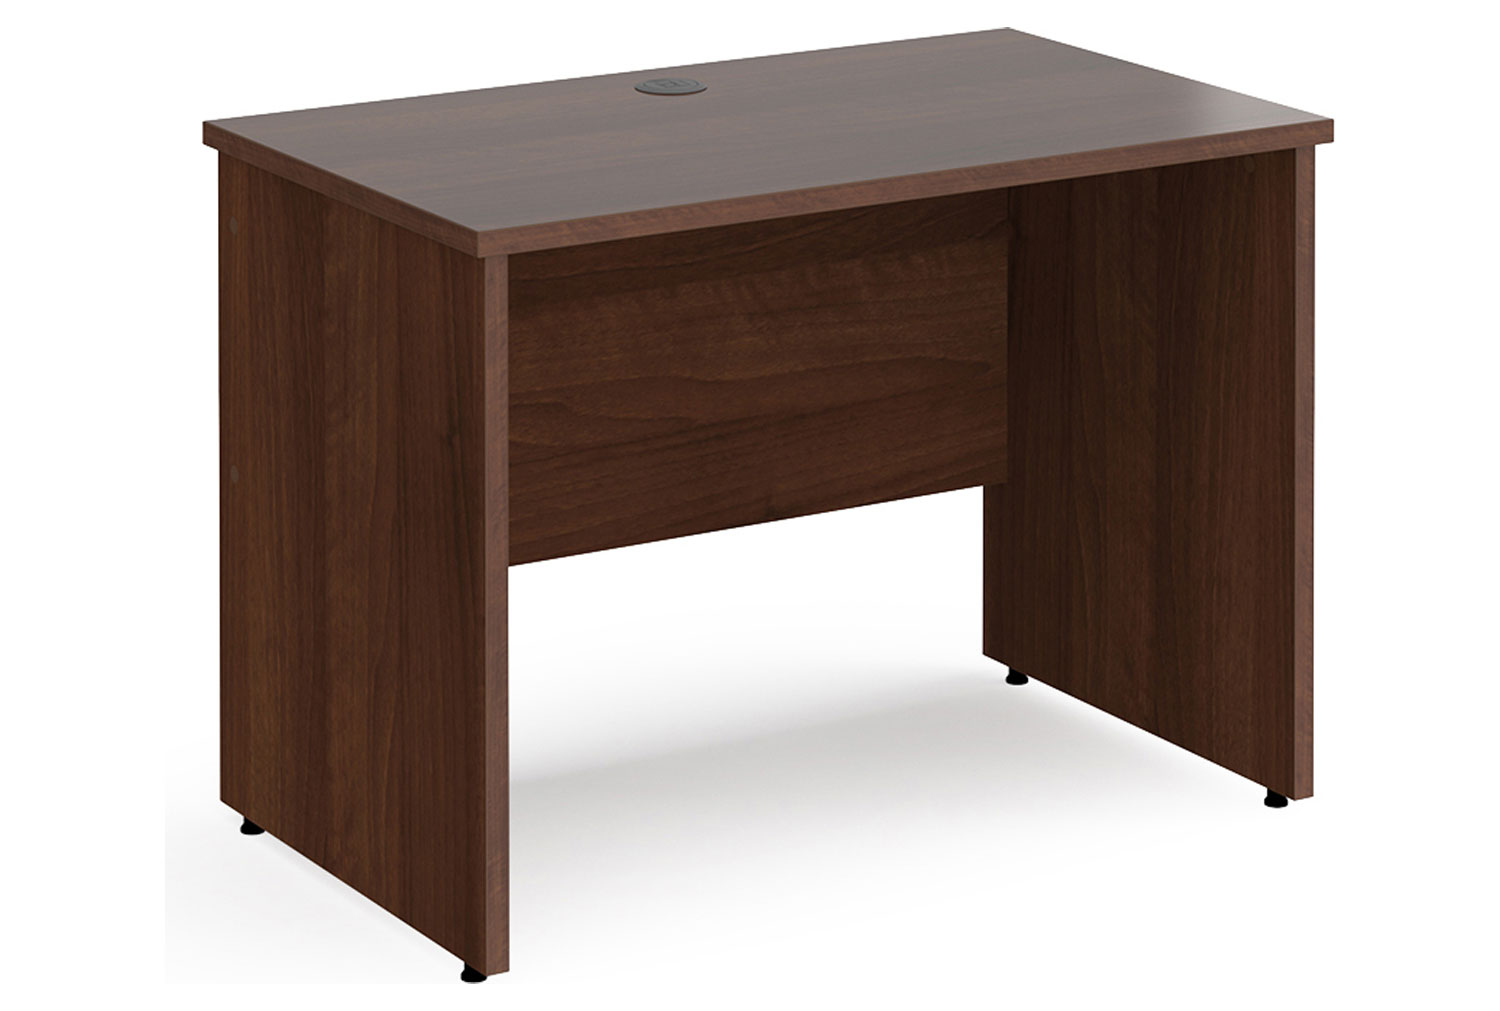 Tully Panel End Narrow Rectangular Office Desk, 100wx60dx73h (cm), Walnut, Fully Installed